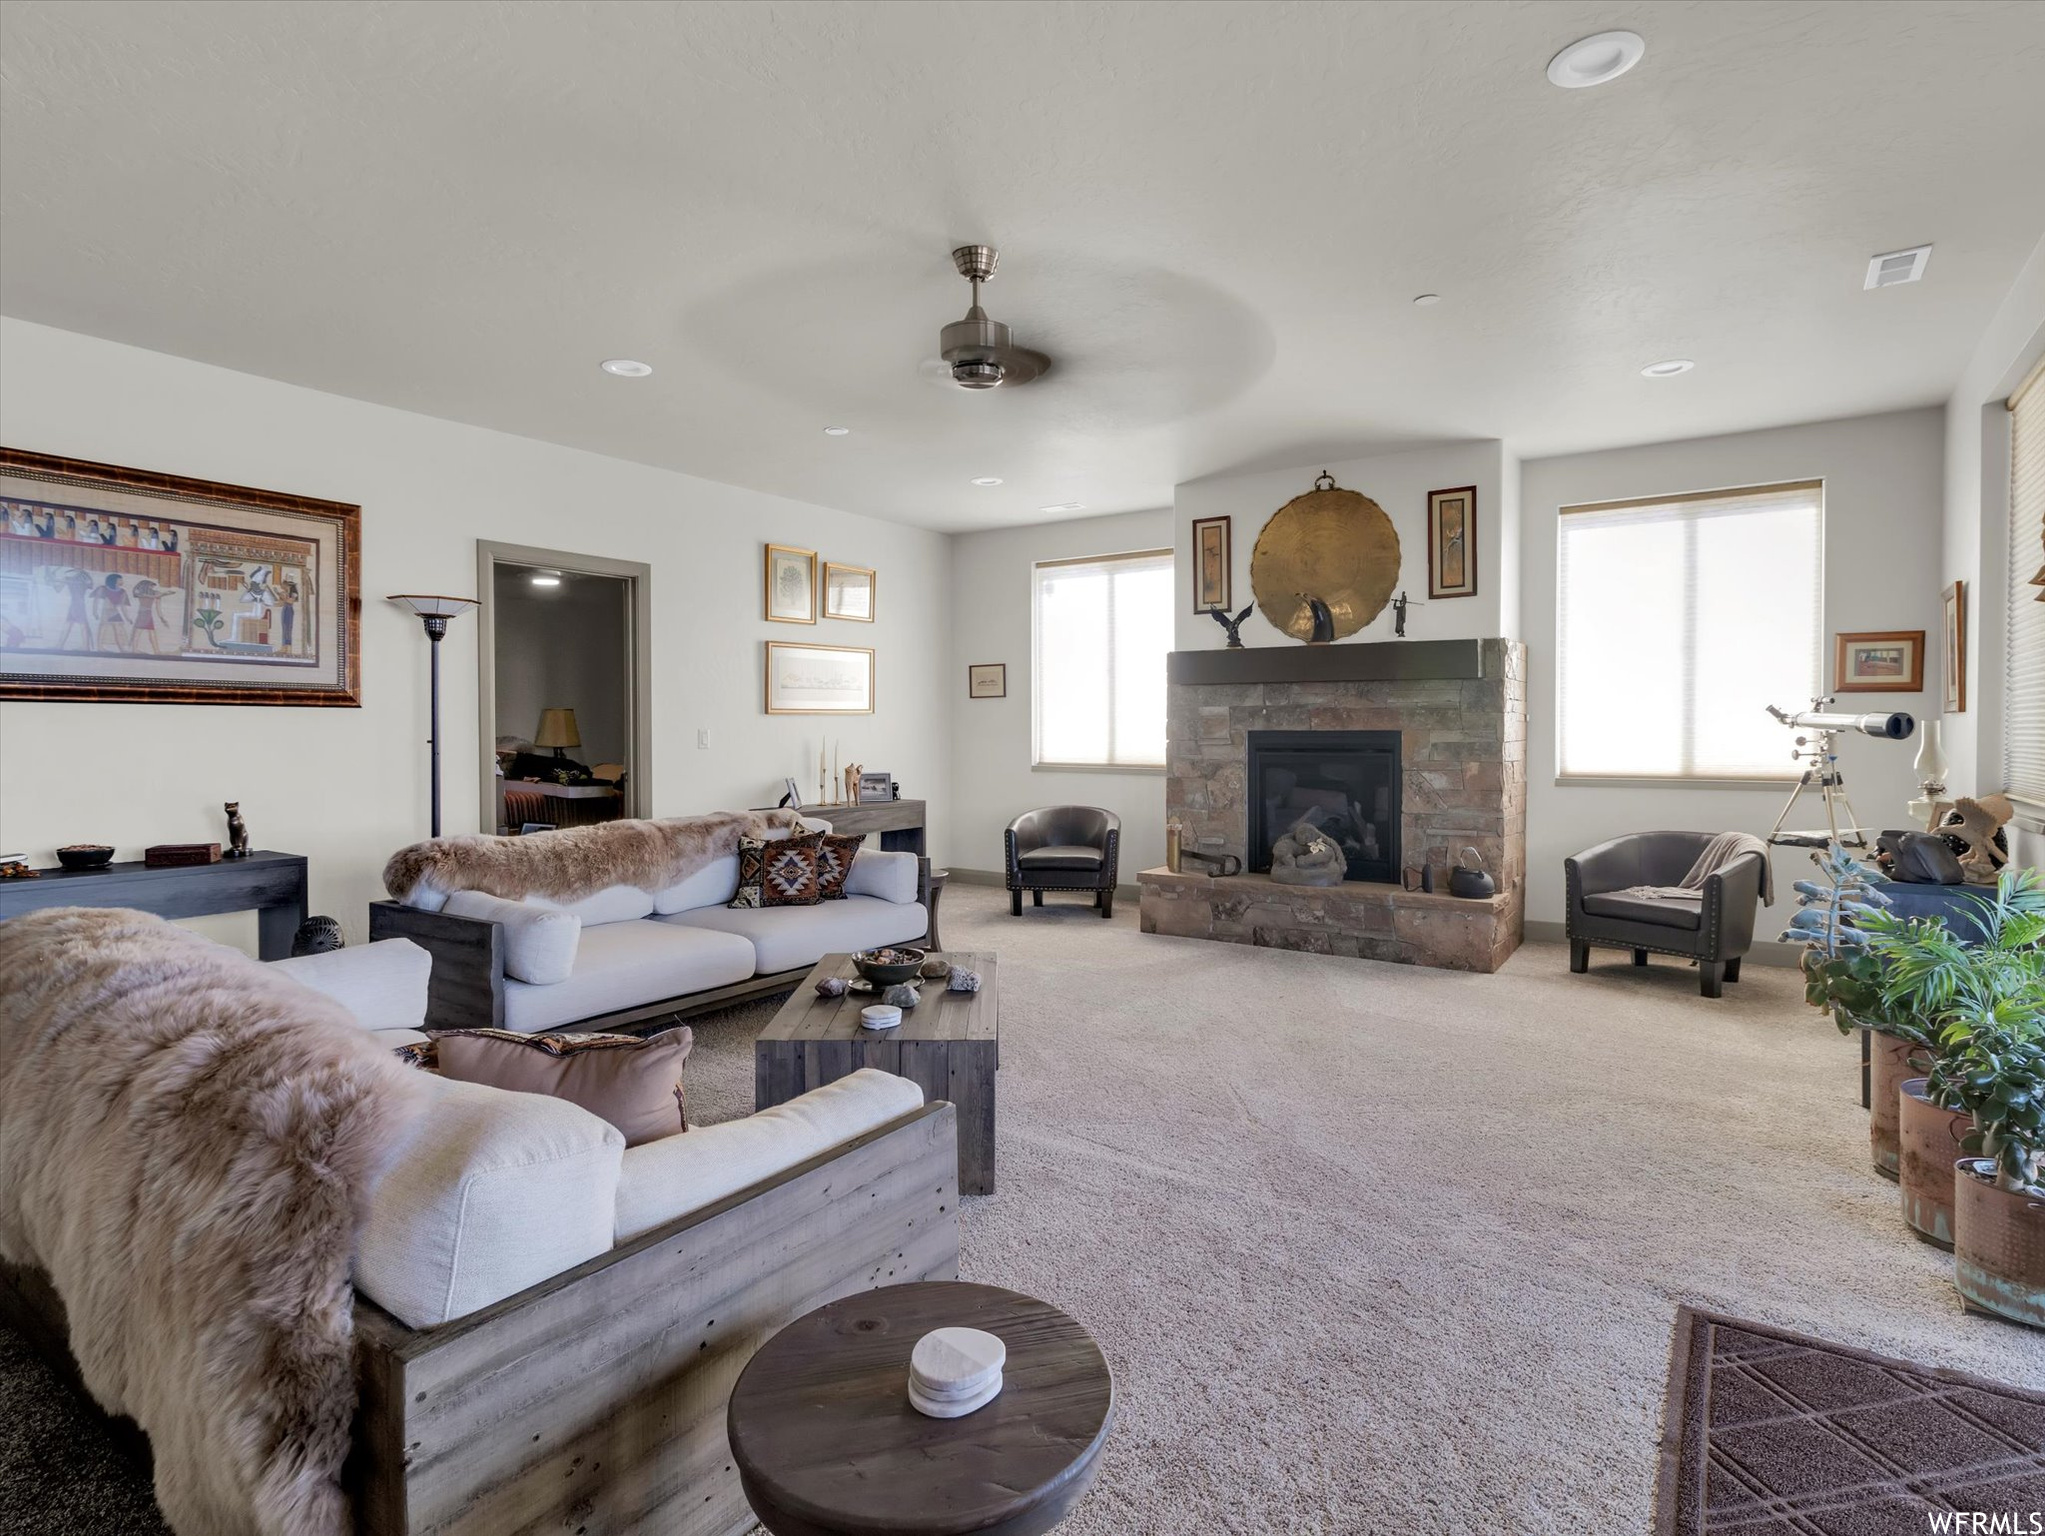 Living room with carpet floors, ceiling fan, and a stone fireplace